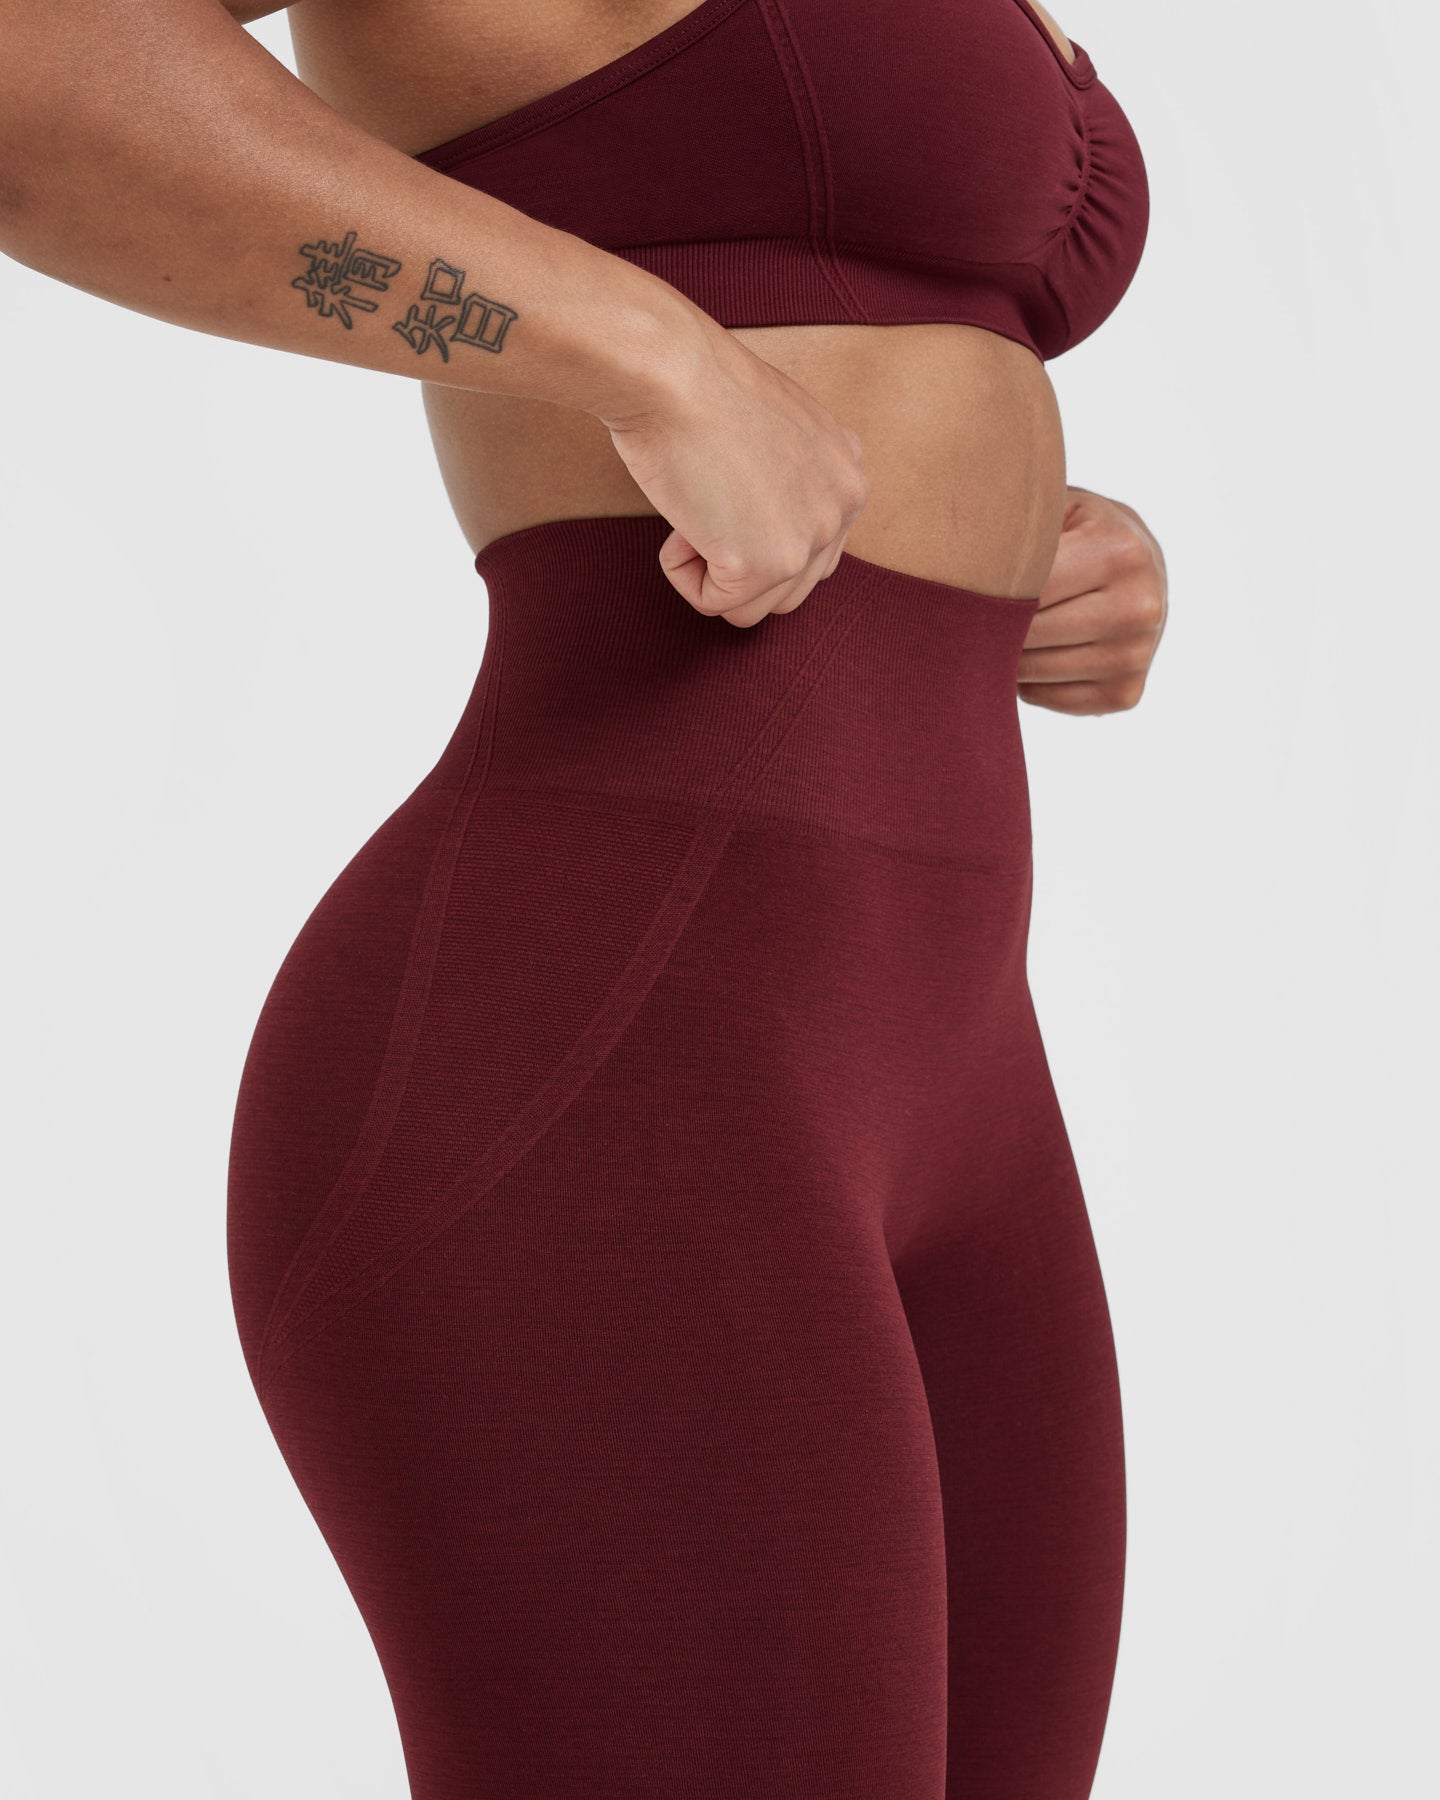 prAna Sopra Seamless Leggings - Women's, Large, Maroon, — Womens Clothing  Size: Large, Womens Waist Size: 31 - 32 in, Inseam Size: 24 in, Gender:  Female — 1970151-600-L — 67% Off - 1 out of 6 models